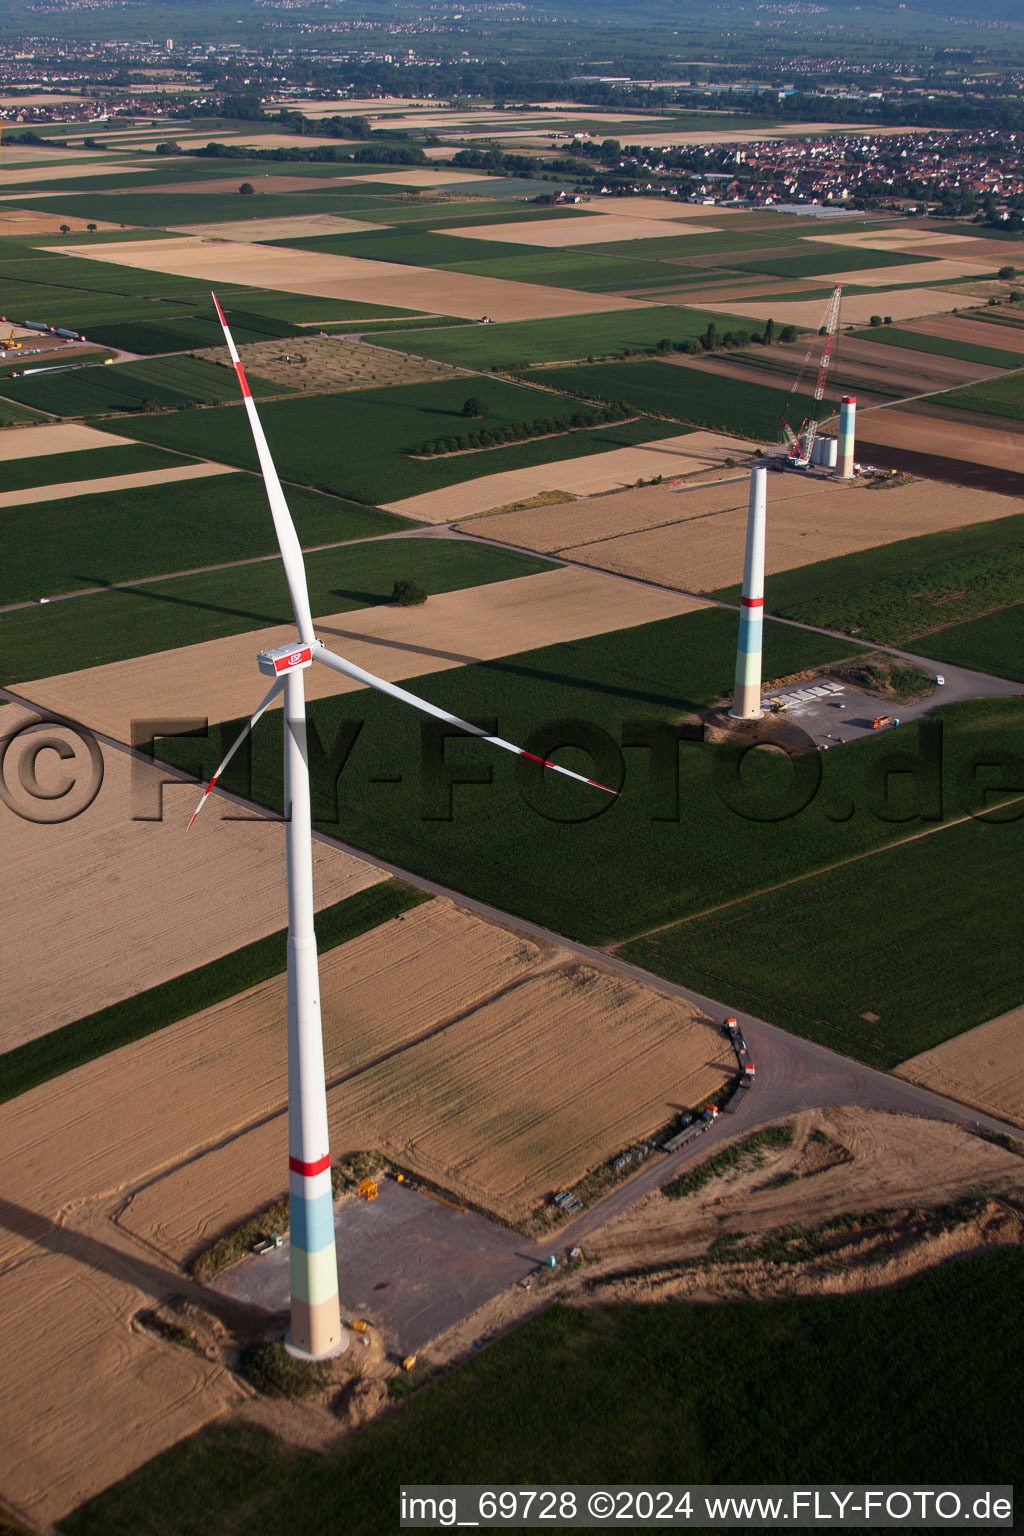 Wind farm construction in Offenbach an der Queich in the state Rhineland-Palatinate, Germany viewn from the air